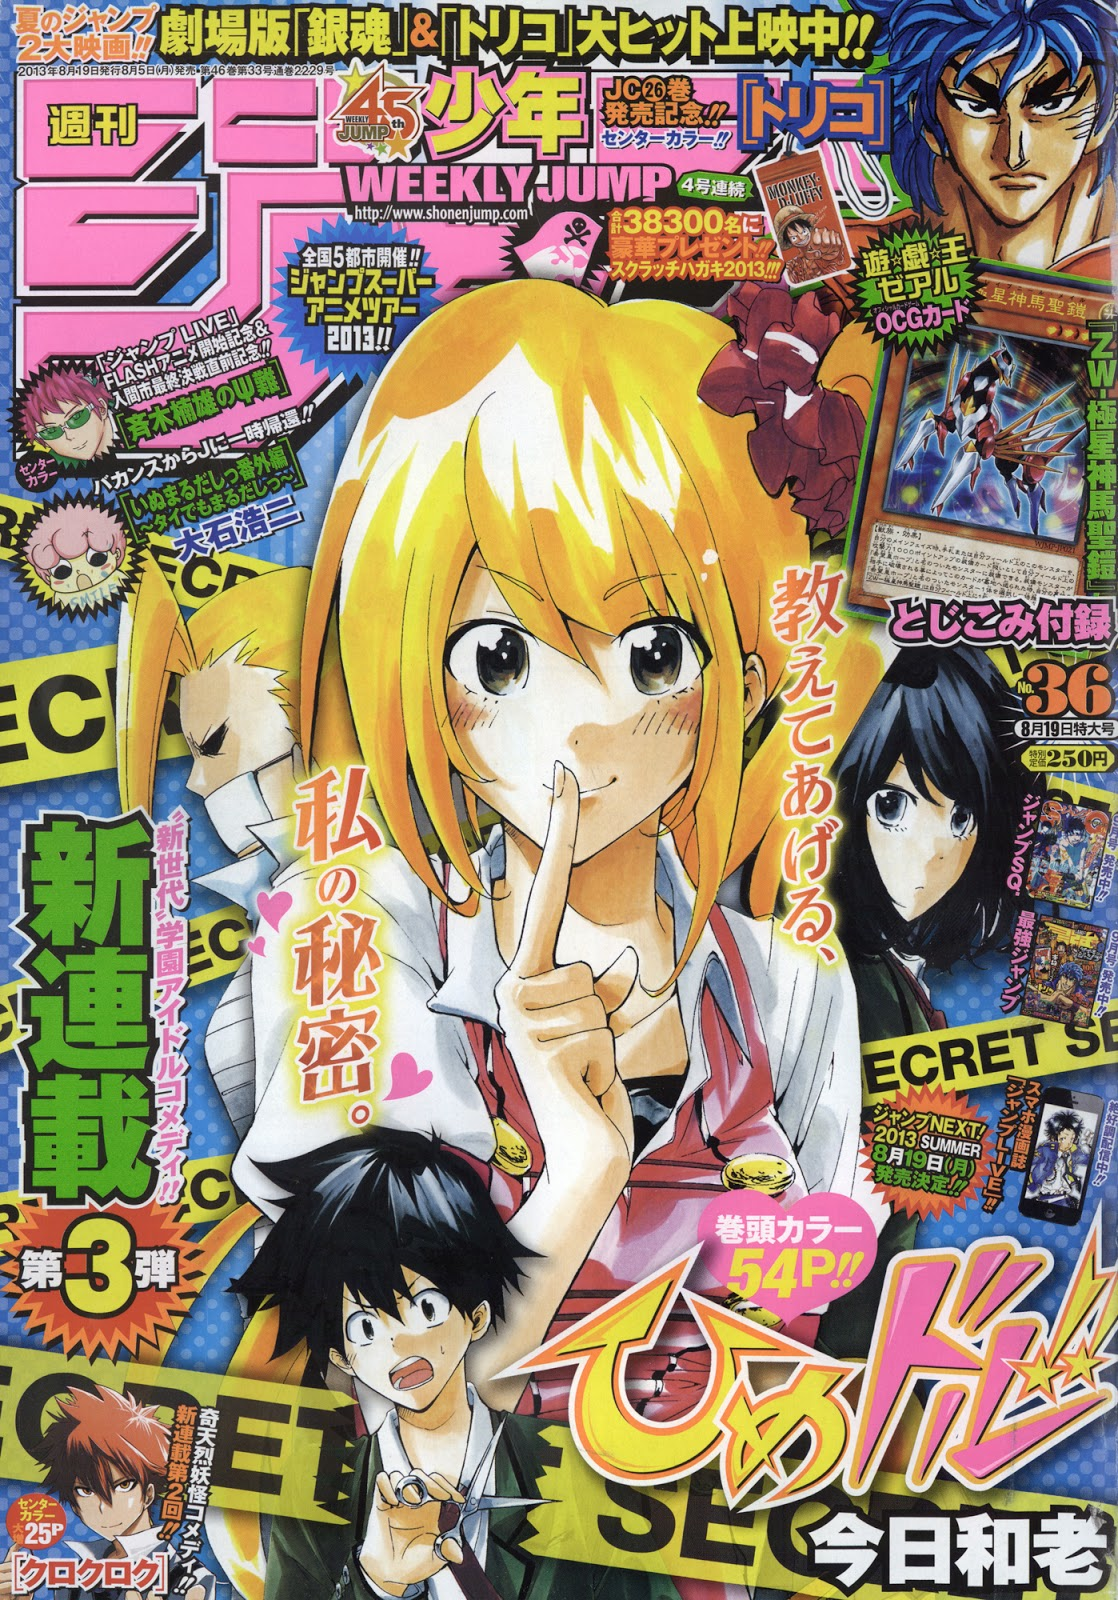 Mag Talk - Weekly Shonen Magazine - News and Discussion, Page 36